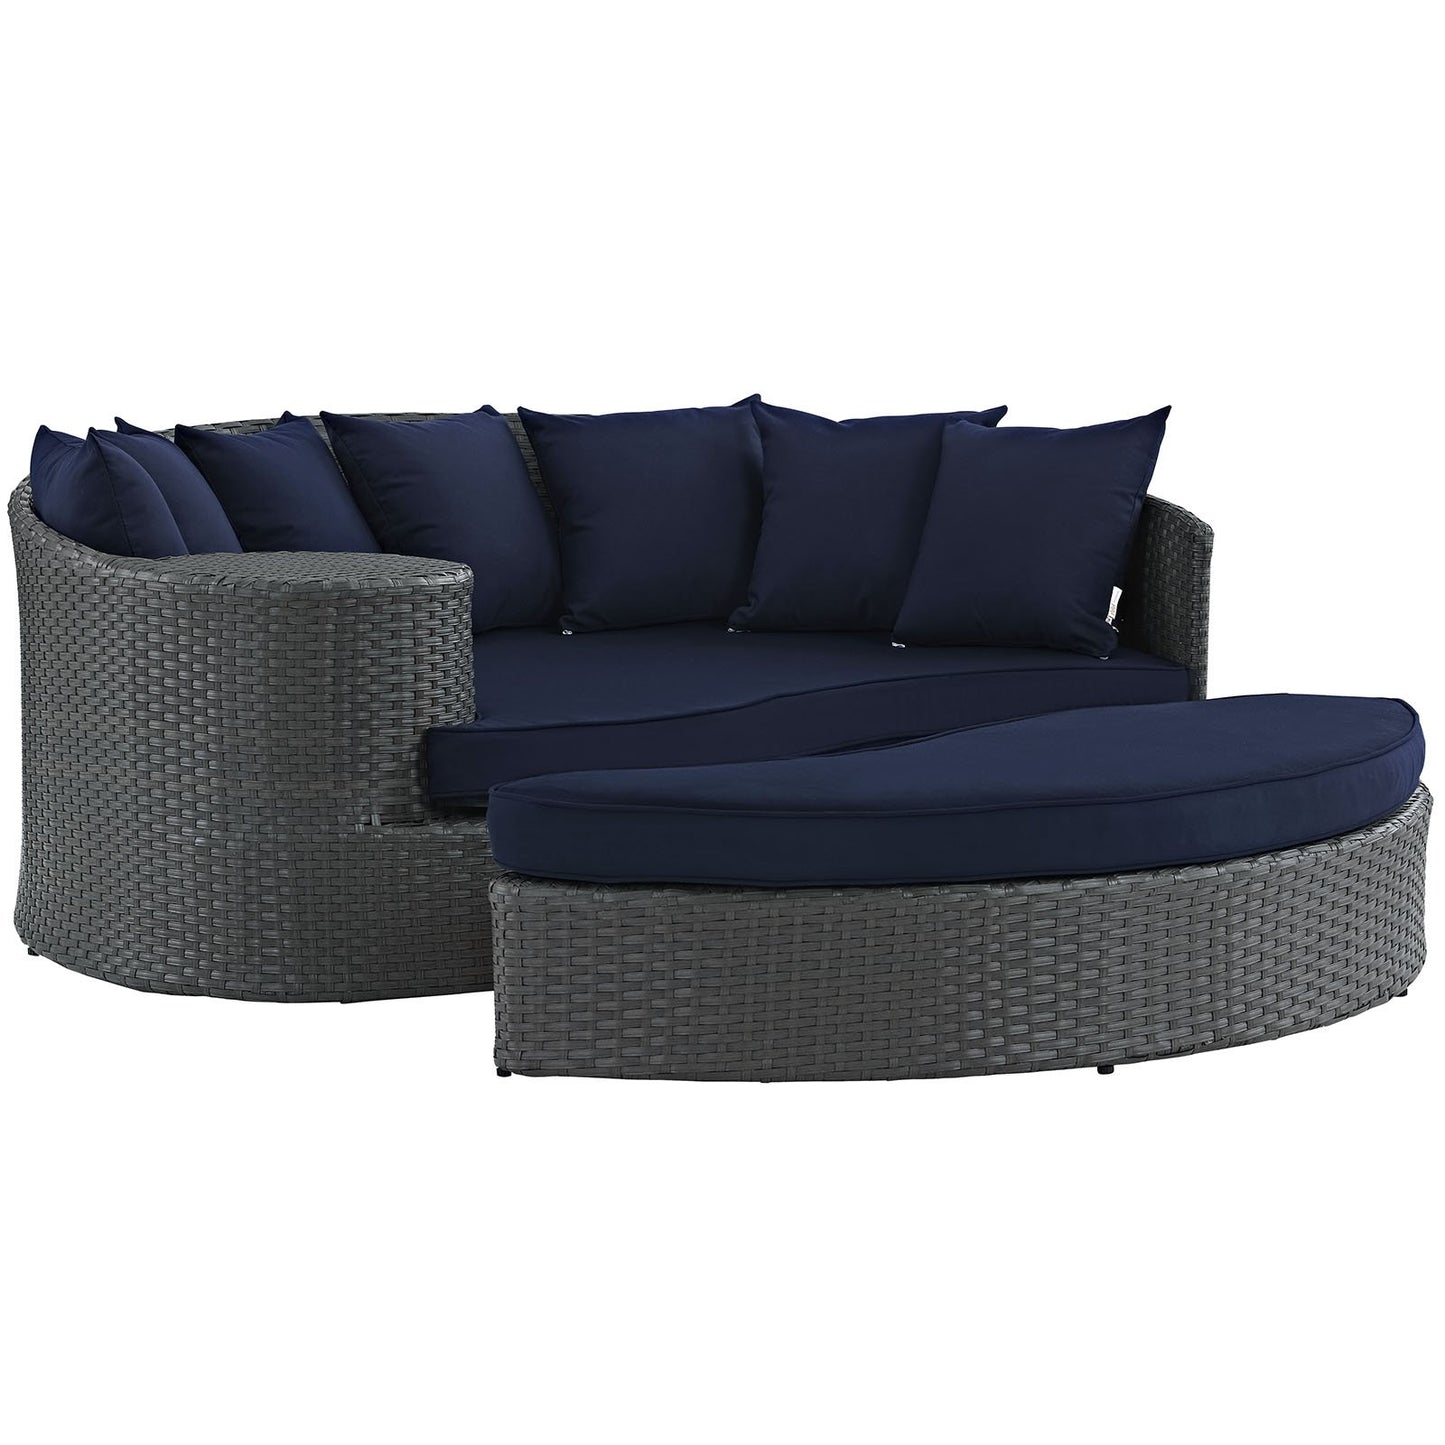 Modway Sojourn Outdoor Wicker Daybed, Sunbrella Fabric, Navy